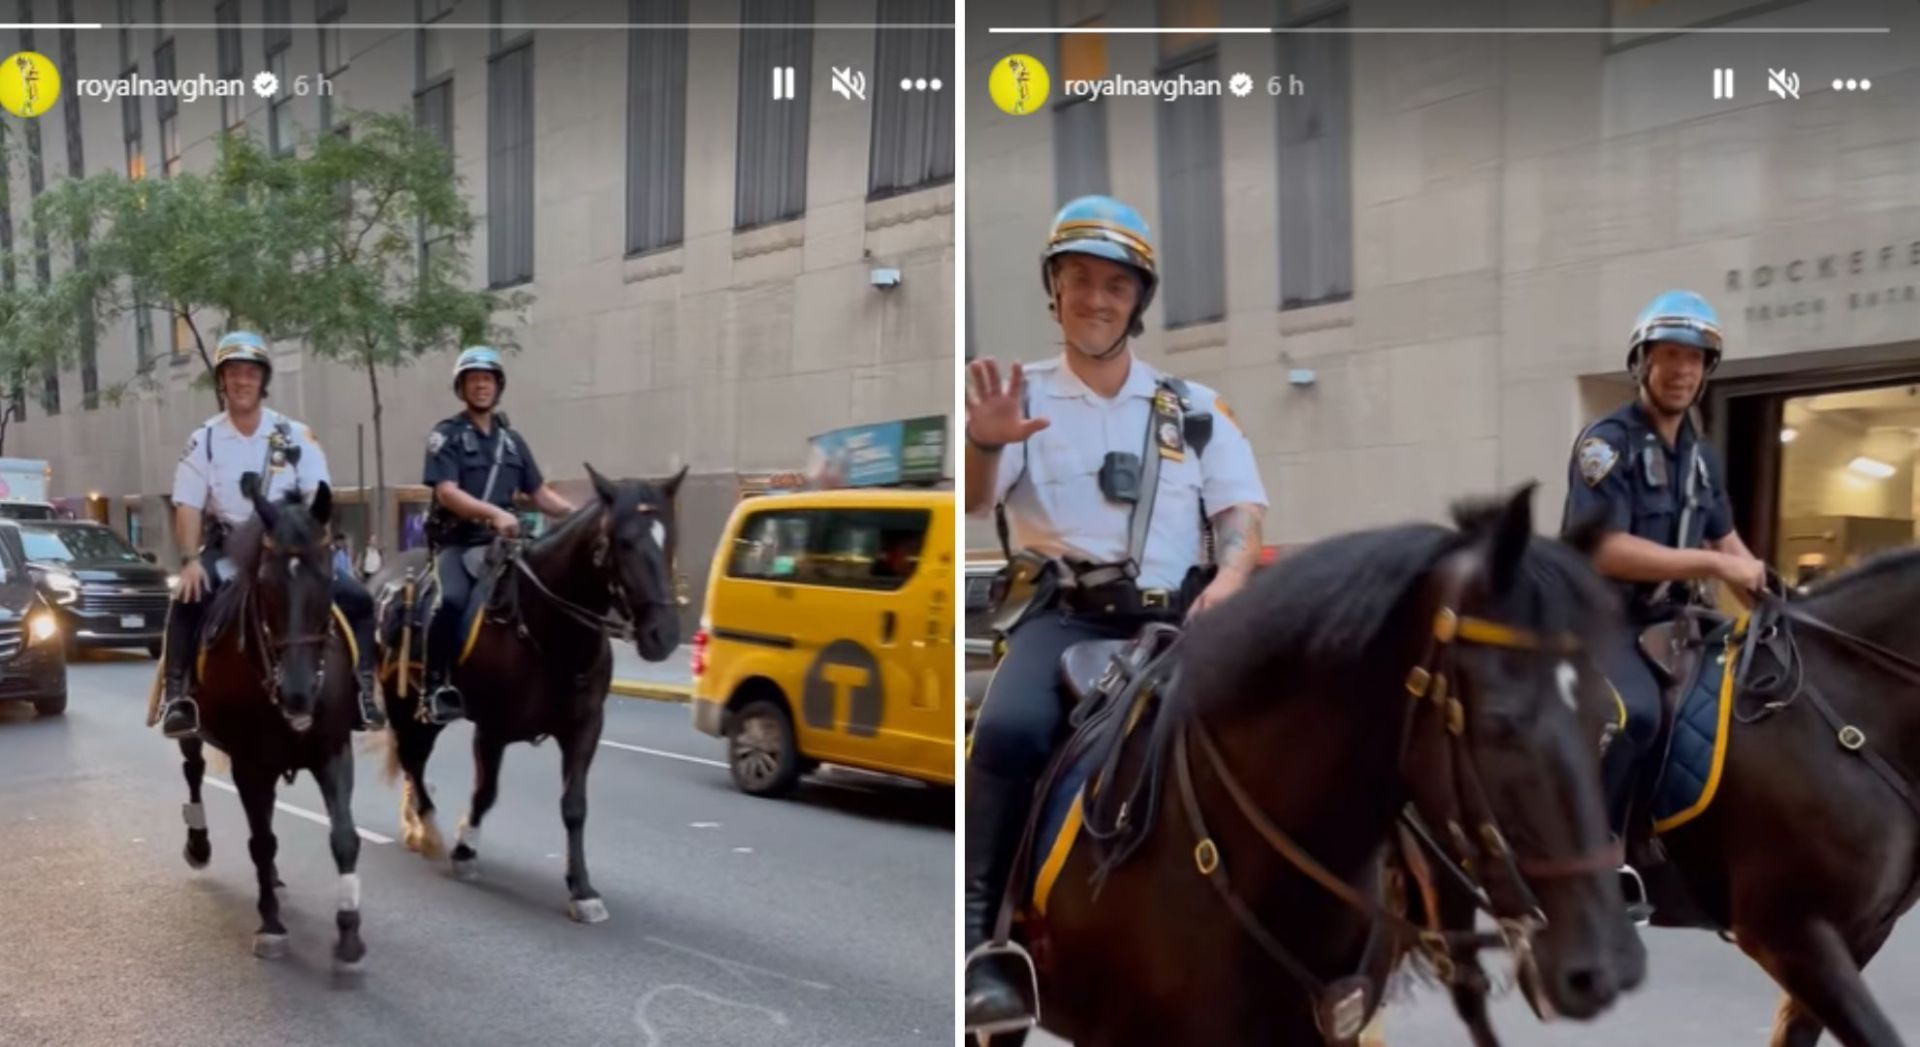 Ravindra Jadeja shared a clip of two men riding horses in the US on Tuesday on Instagram story.